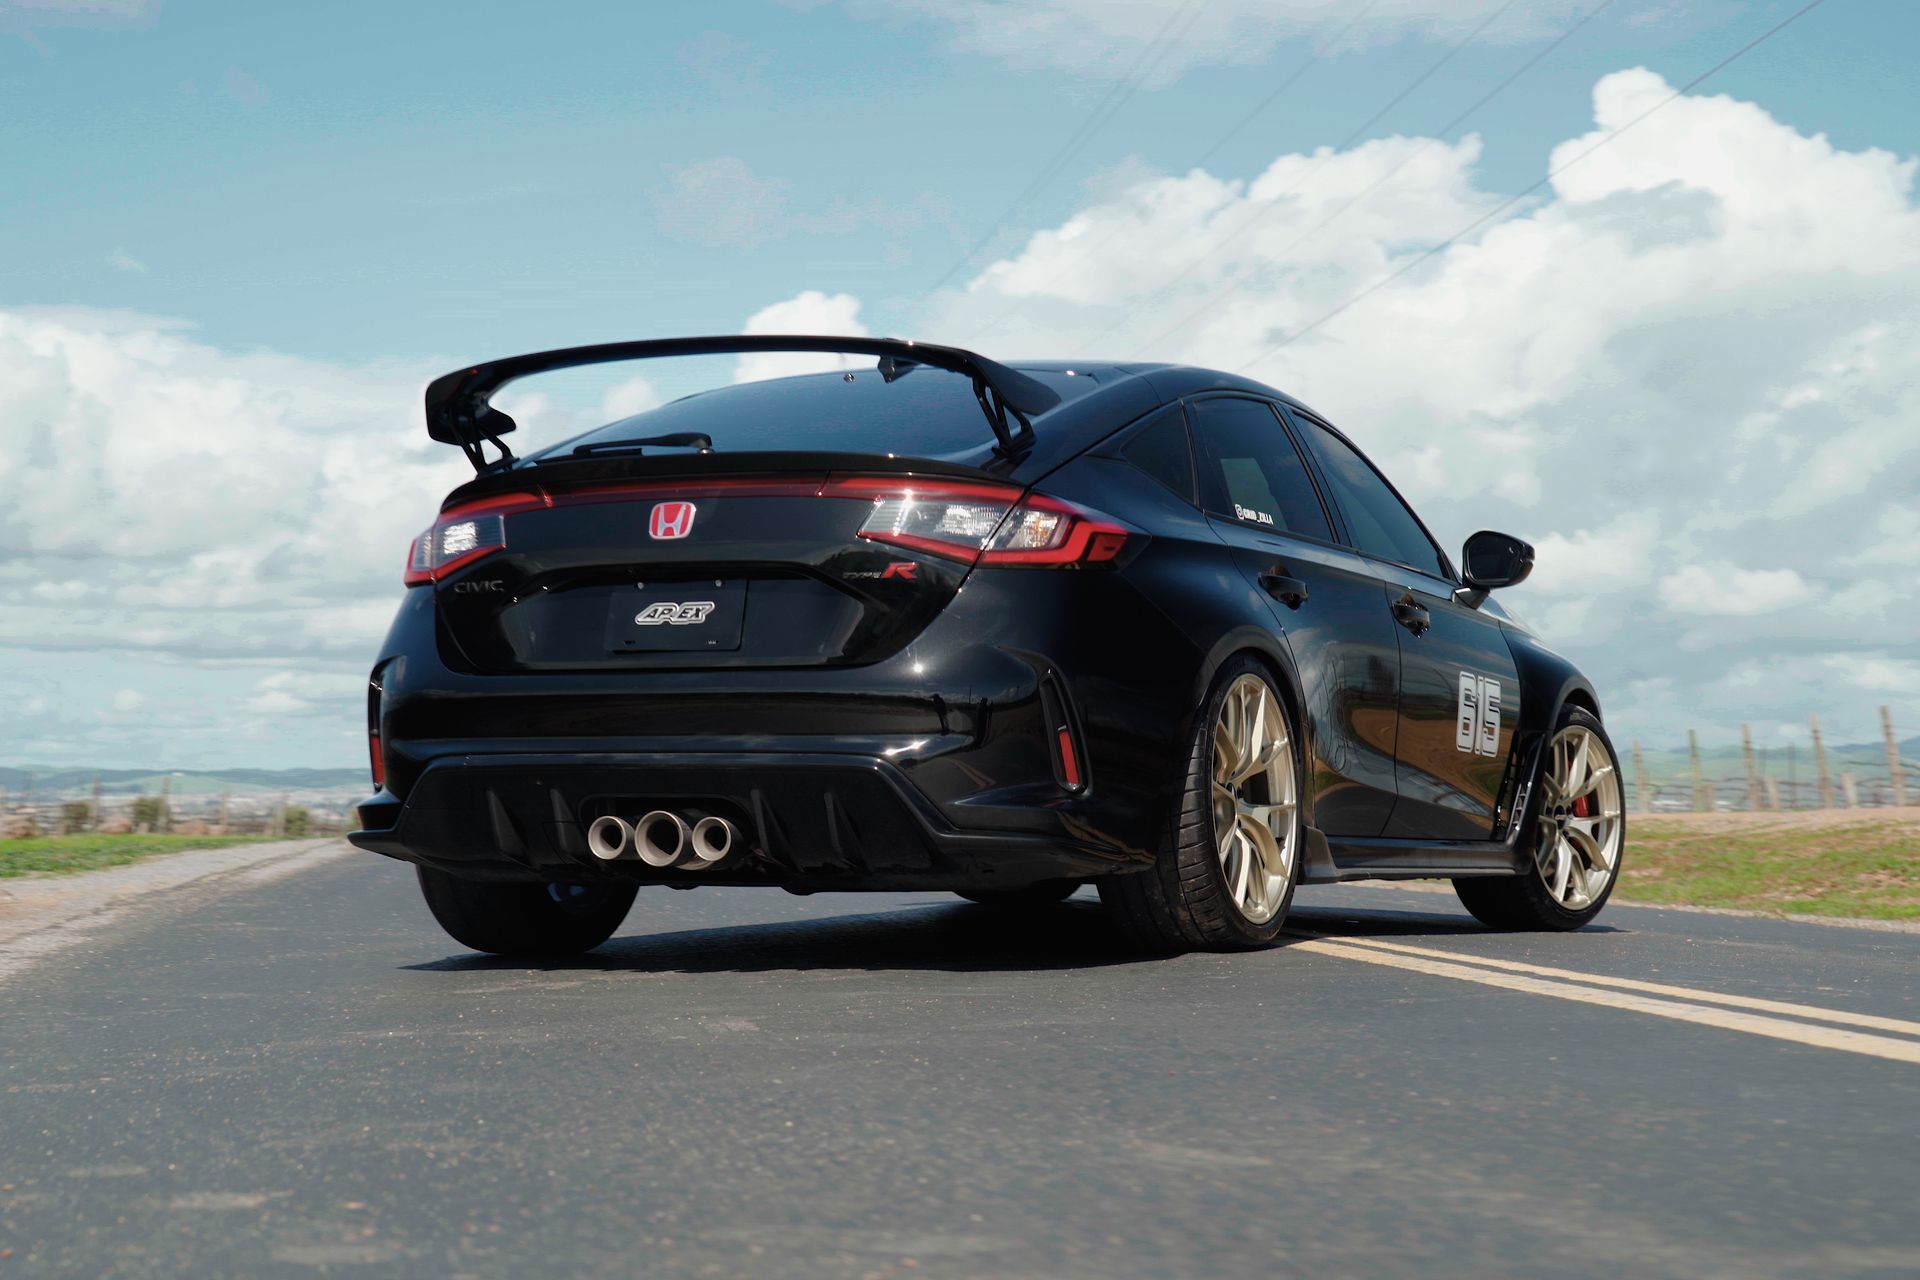 Honda FL5 Civic Type-R with 19" VS-5RS in Motorsport Gold